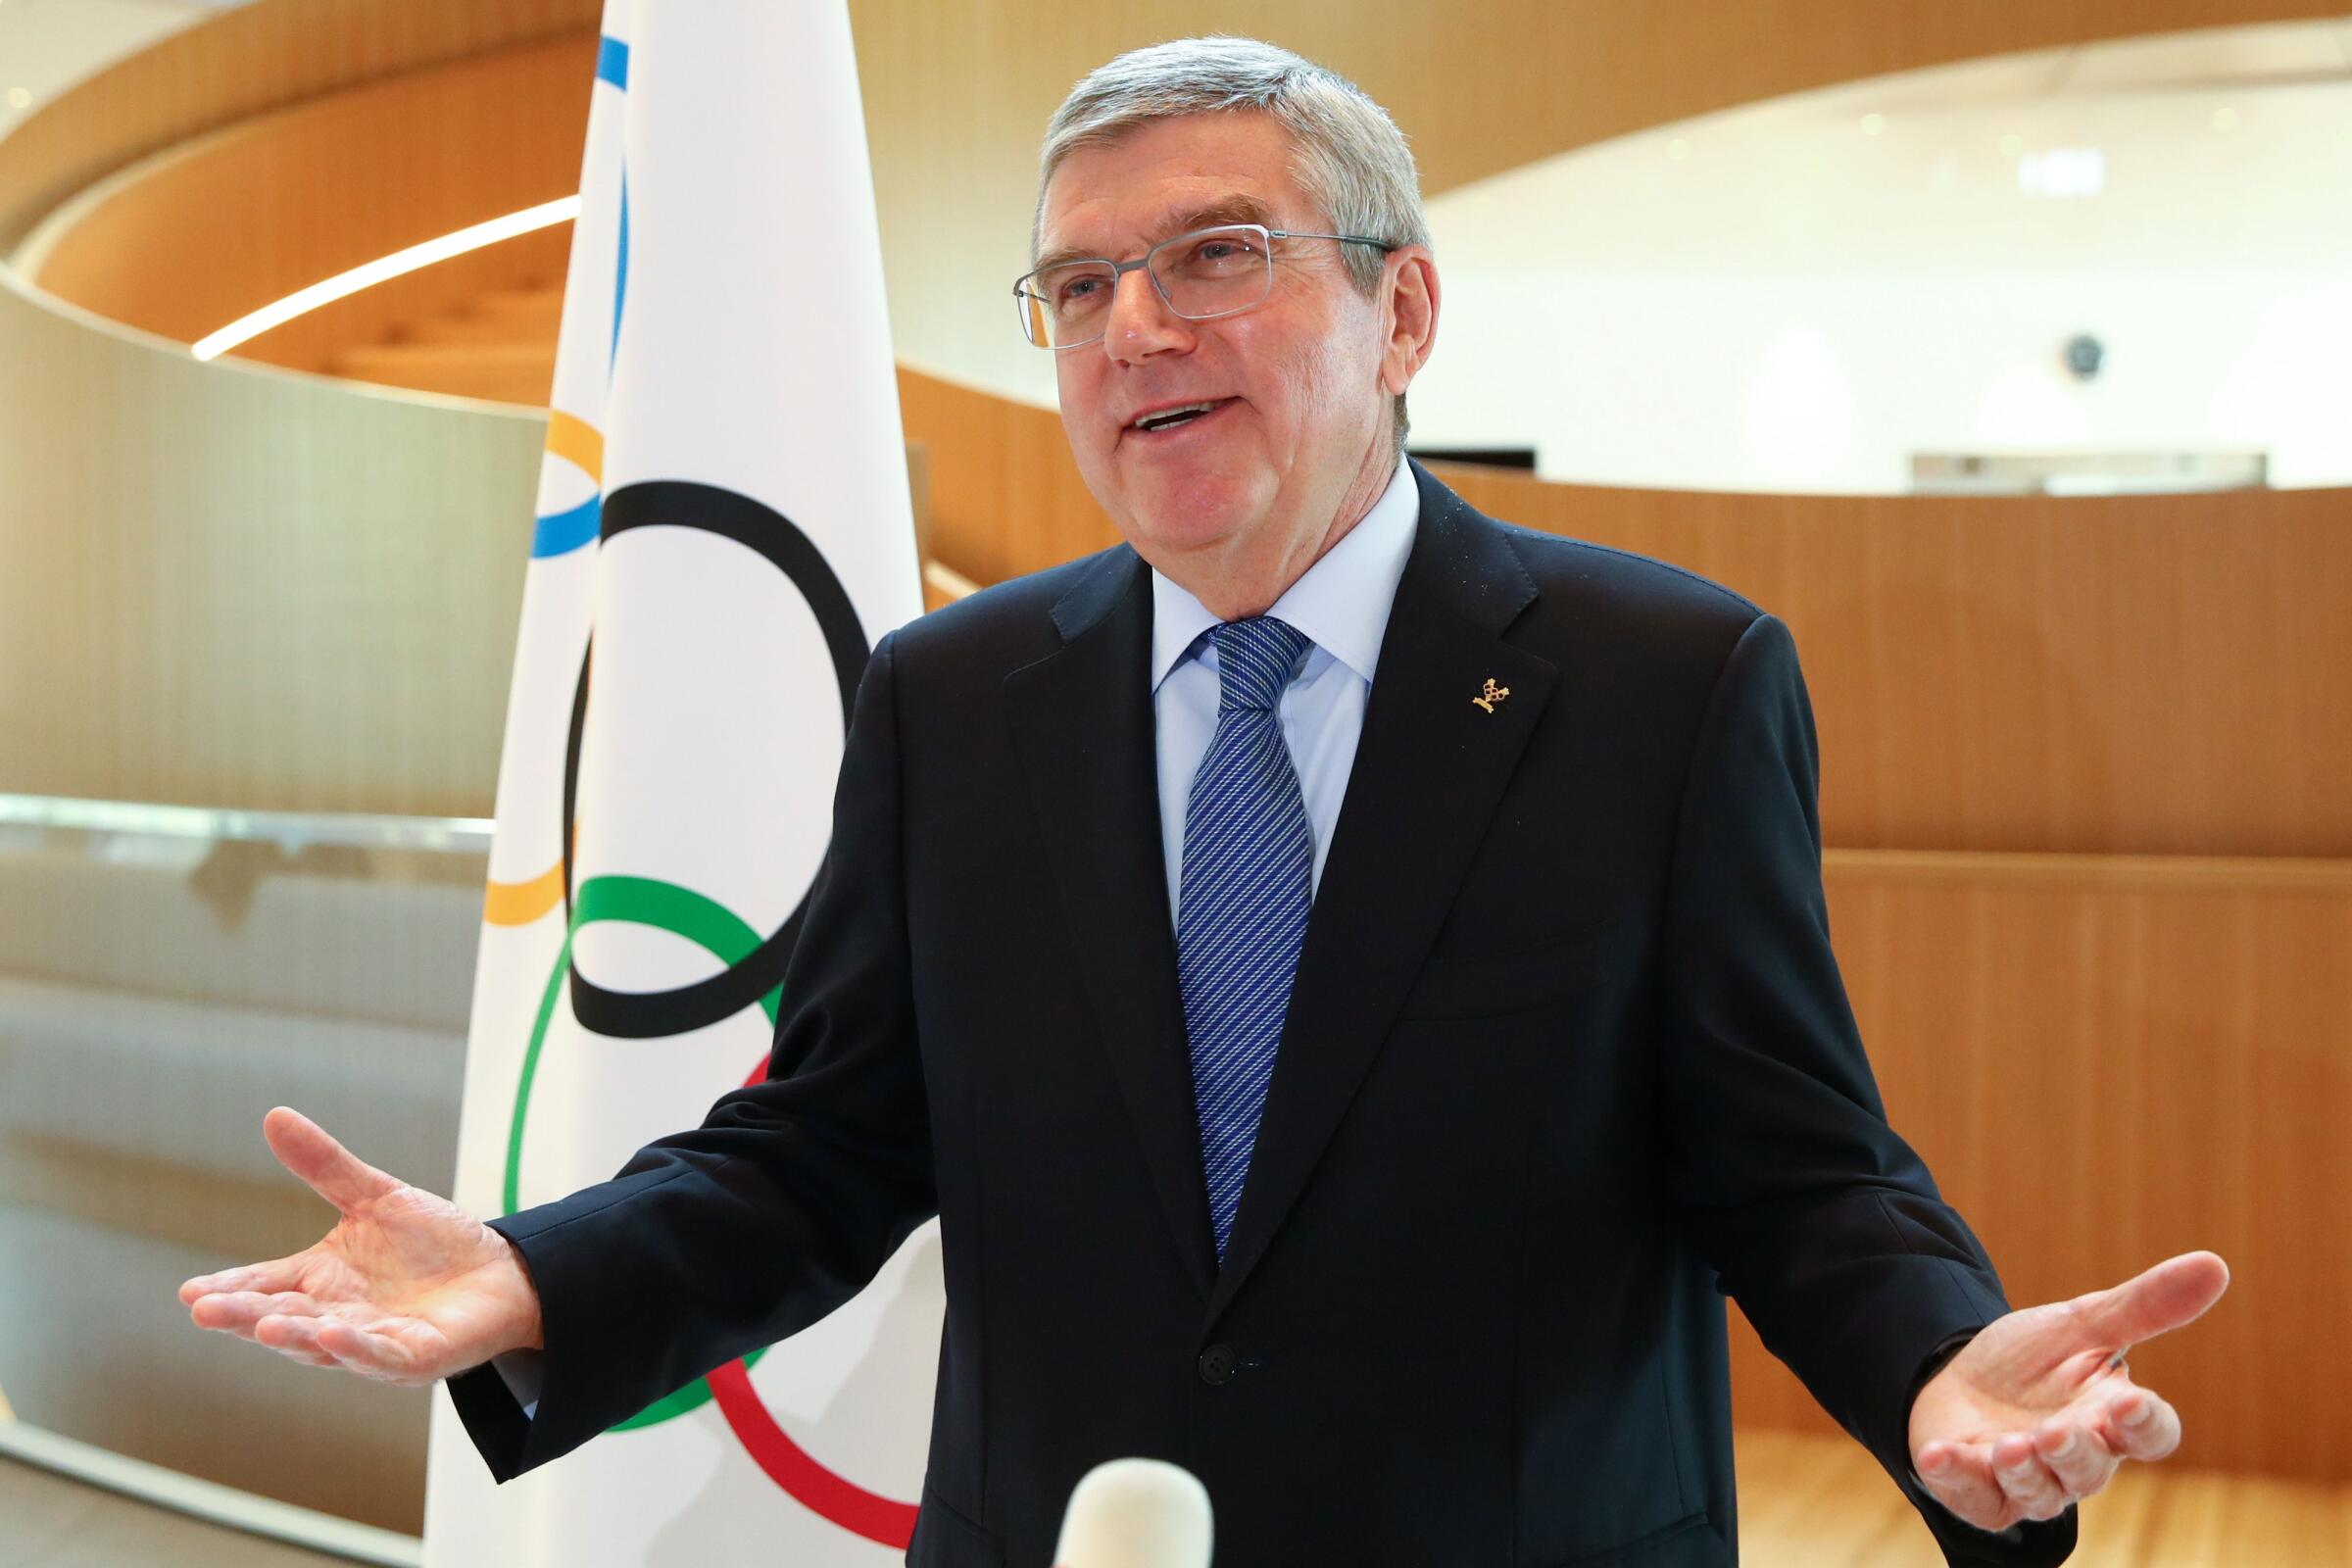 International Olympic Committee (IOC) President Thomas Bach gestures as he speaks during an interview after the historic decision to postpone the 2020 Tokyo Olympic Games due to the coronavirus pandemic, in Lausanne, Switzerland, on March 25, 2020. - Olympic chief Bach says "all options are on the table" over finding a new date to hold the postponed Tokyo Games. Tokyo 2020 became the first Olympics in peacetime to be postponed due to the coronavirus pandemic. Announcing the unprecedented decision on March 24, the International Olympic Committee gave no specific new date, saying only it would be "beyond 2020 but not later than summer 2021". (Photo by Denis Balibouse / POOL / AFP) (Photo by DENIS BALIBOUSE/POOL/AFP via Getty Images)